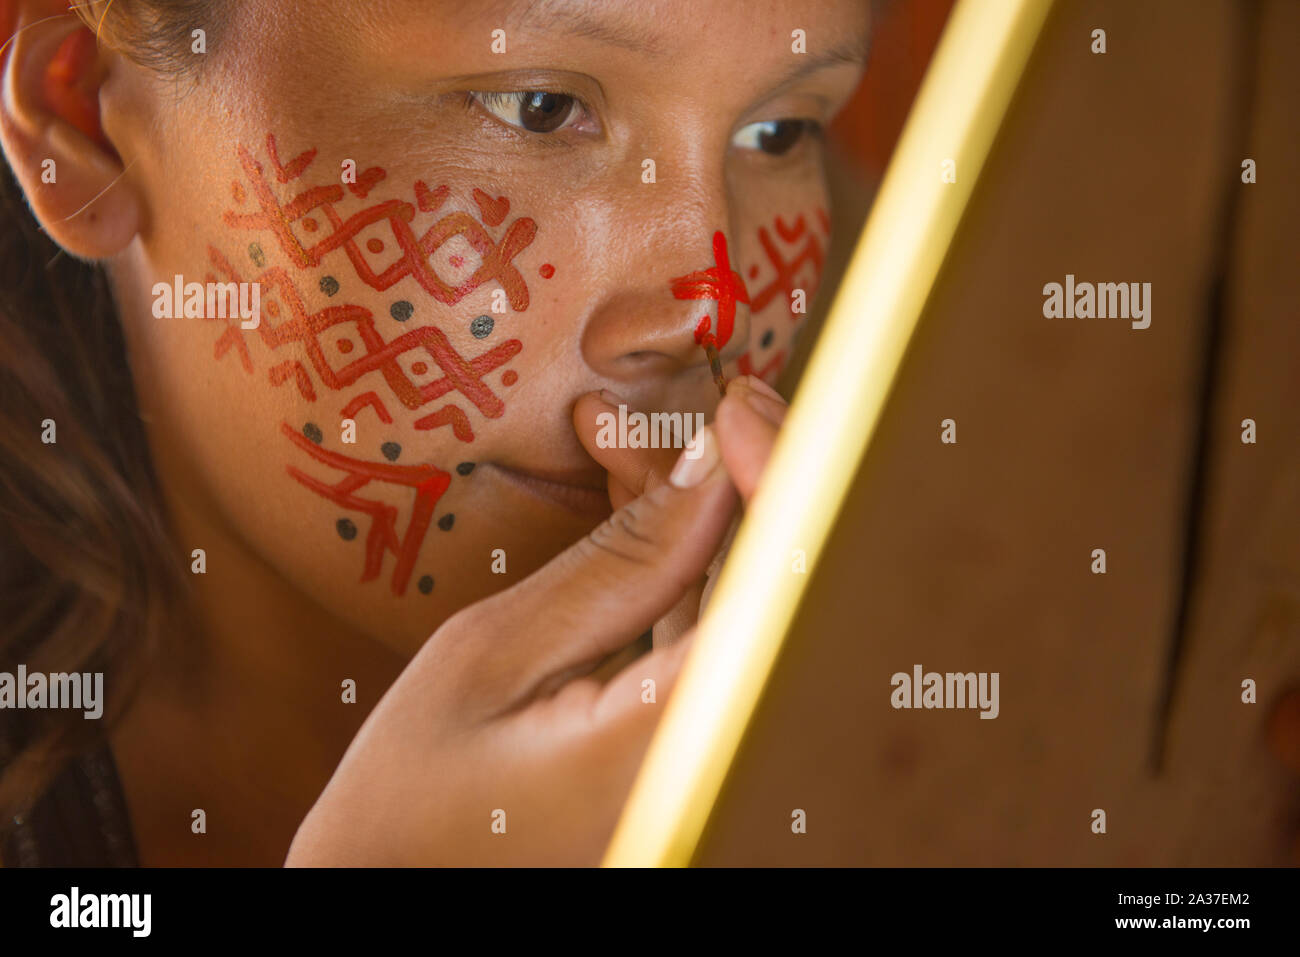 Ashaninka girl with red face paint Stock Photo - Alamy